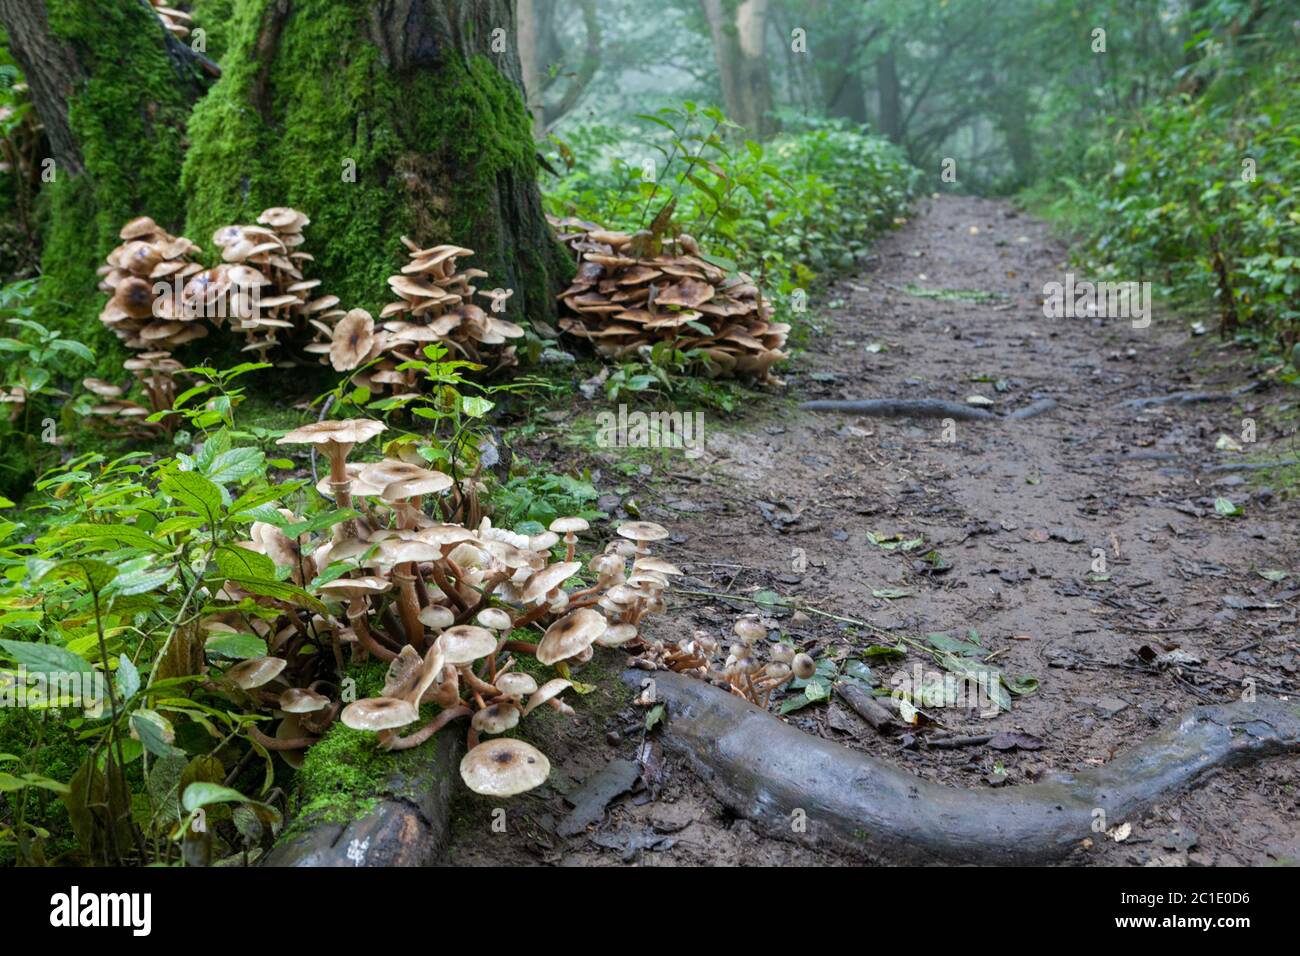 Autumn view of sulphur tuft mushrooms growing on a moss covered tree trunk next to a path Stock Photo